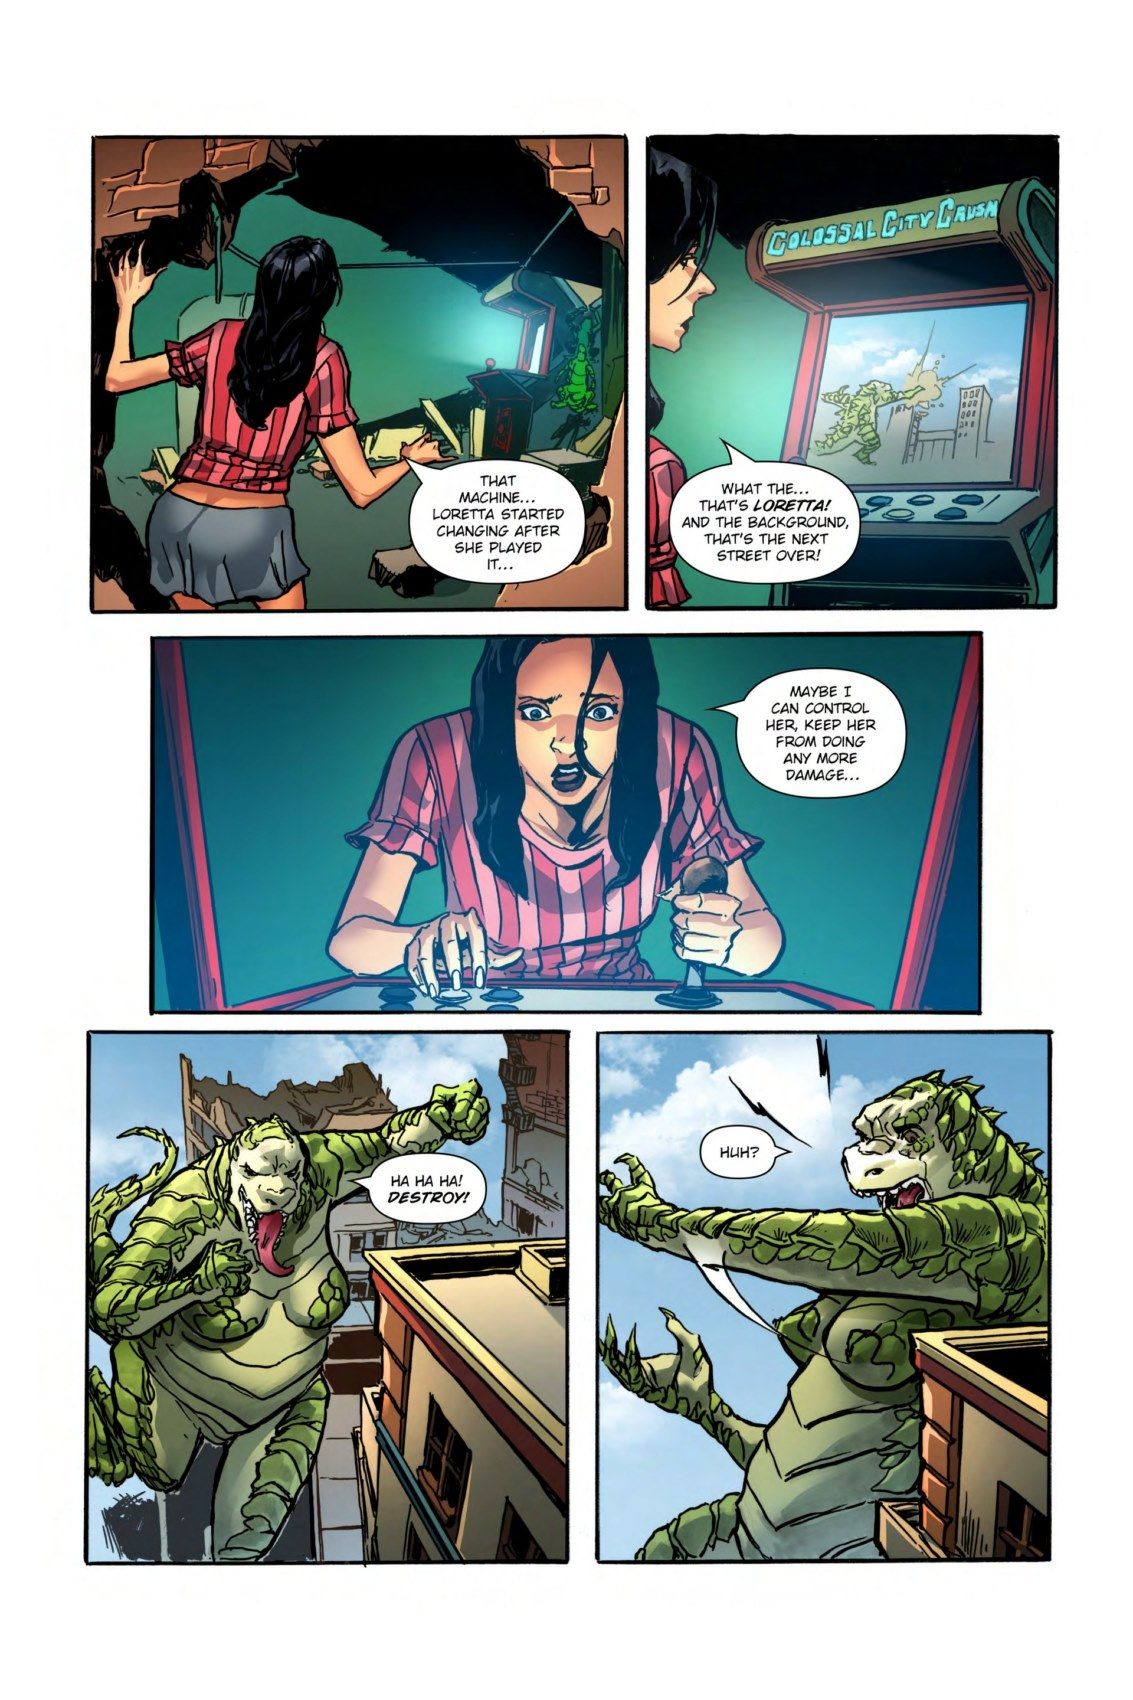 Colossal City Crush Issue 02 Transform Fan page 5